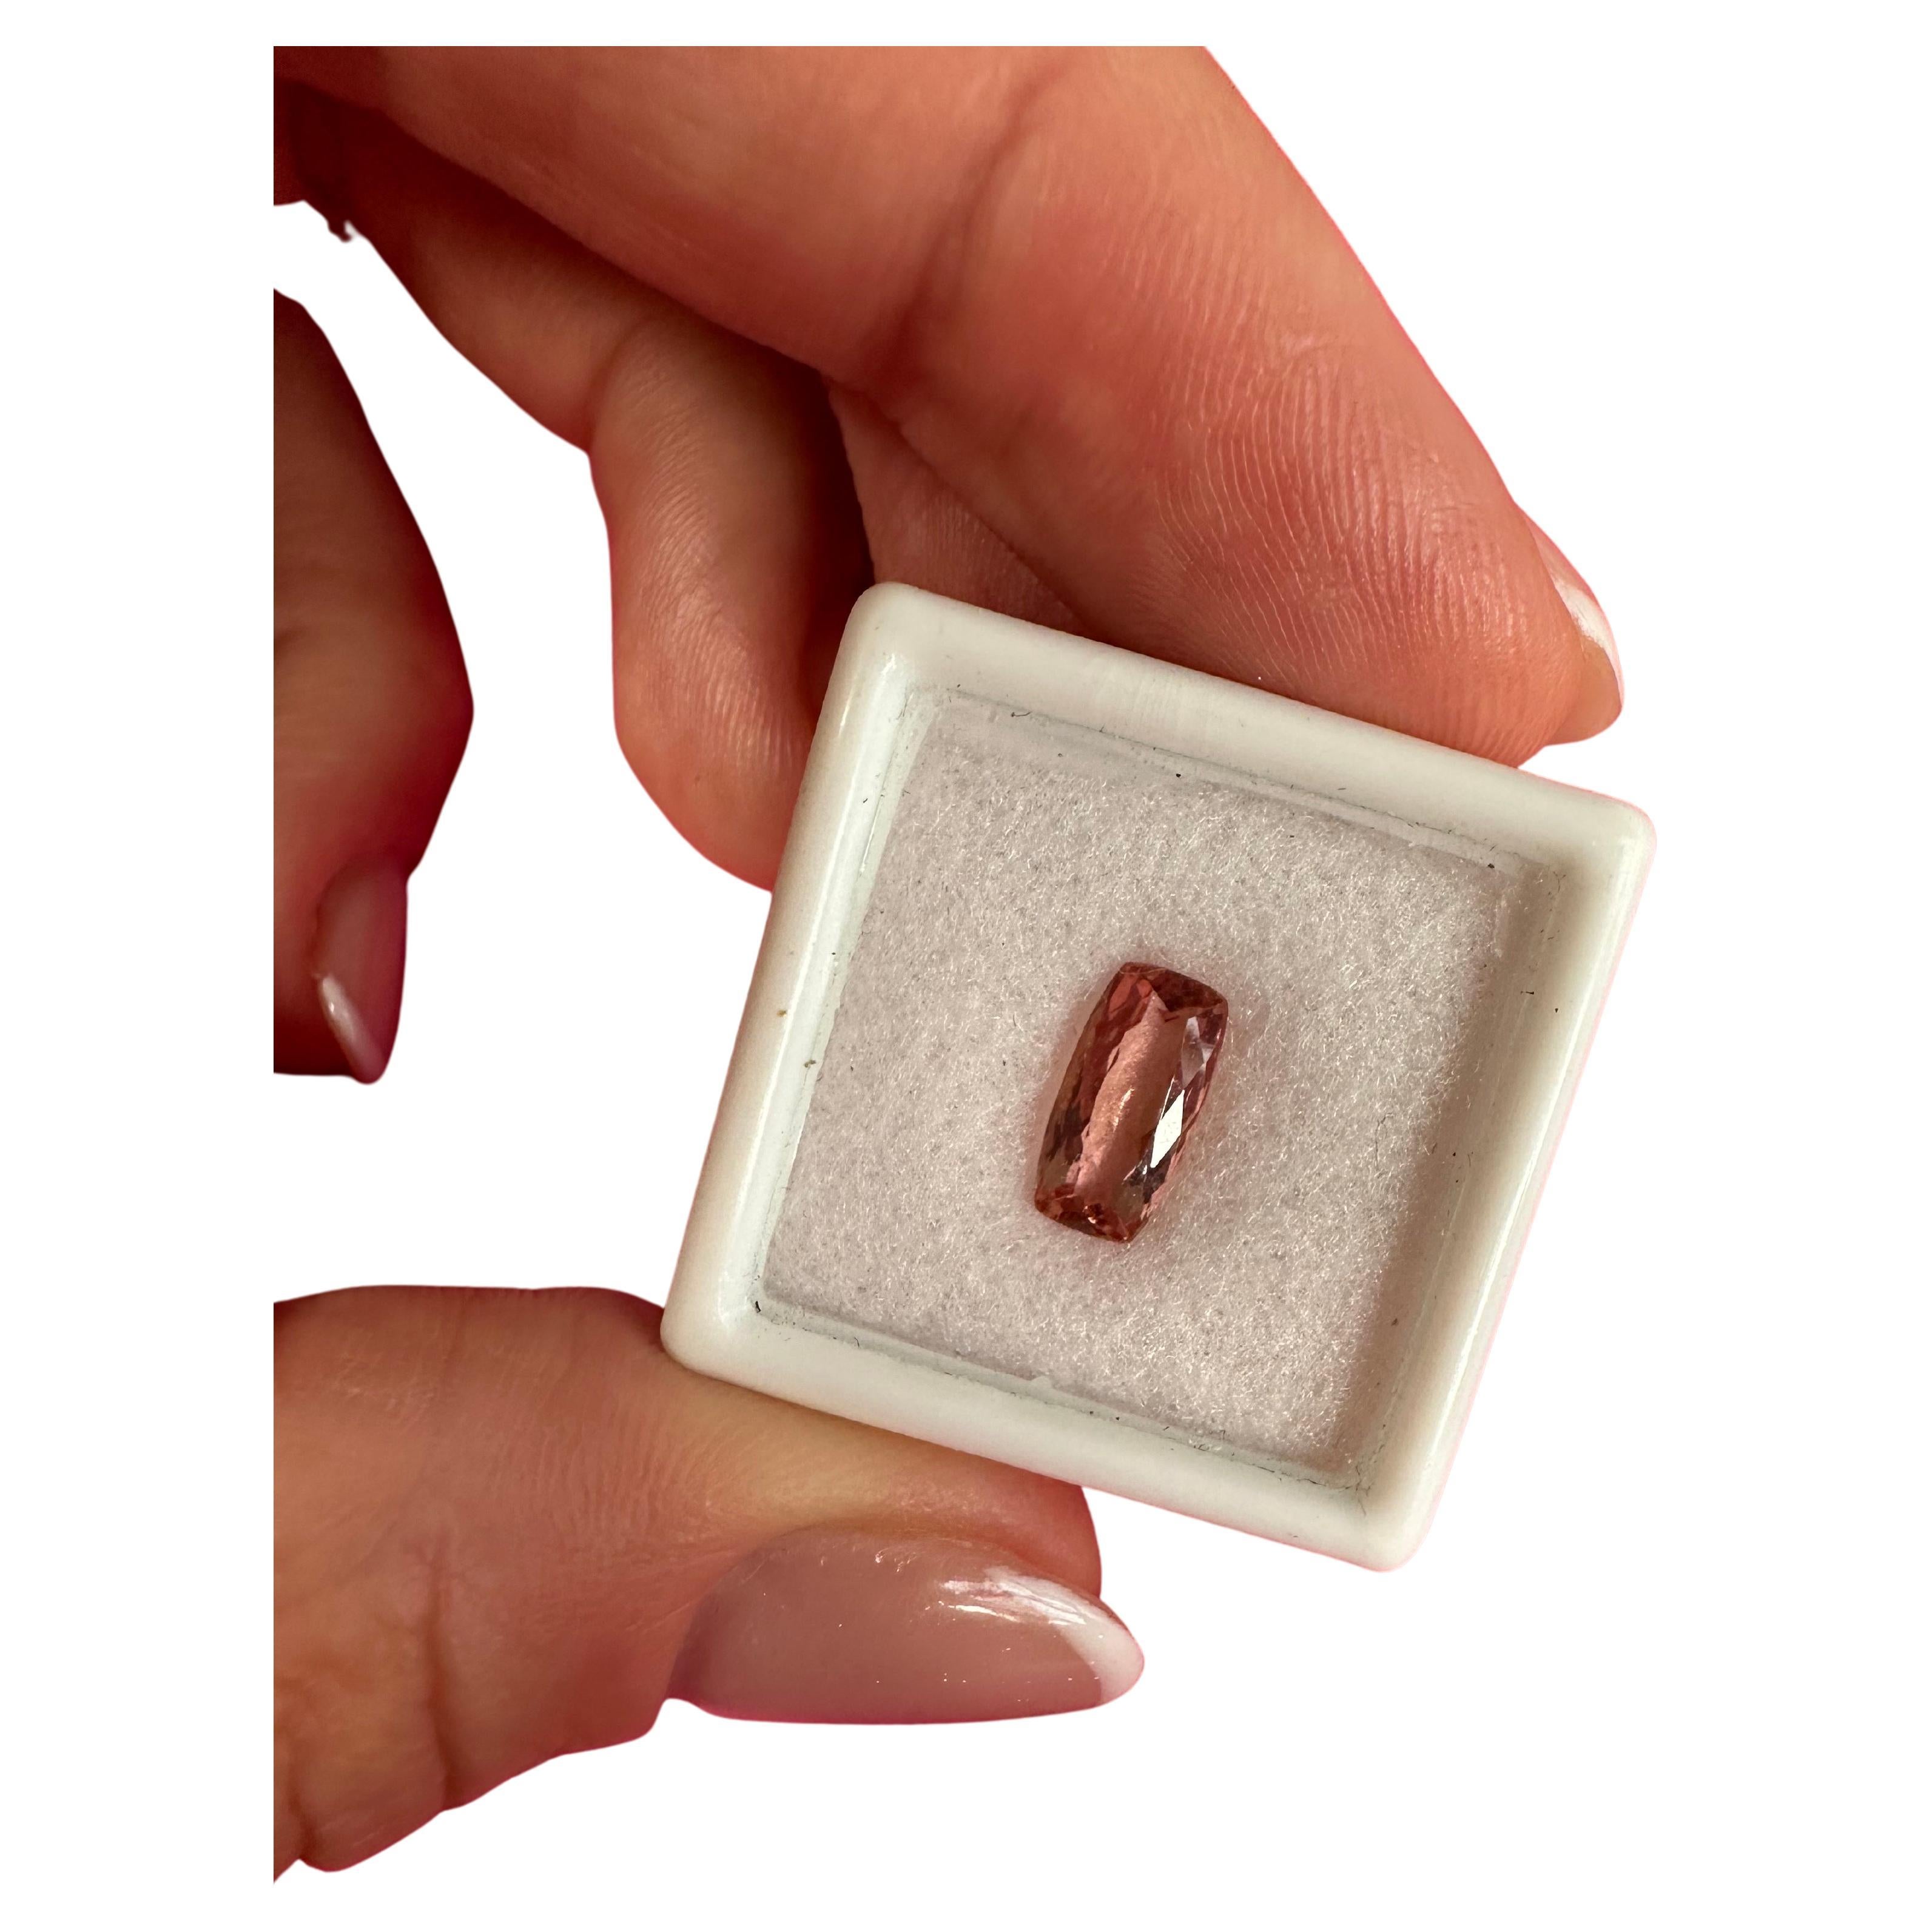 Stunning pink topaz, loose and unset, will come with a certificate of authenticity.

NATURAL GEMSTONE(S): TOPAZ (IMPERIAL)
Clarity/Color: Slightly Included/Pink
Cut: Rectangular 10.2 x 5.2mm
Treatment: none


WHAT YOU GET AT STAMPAR